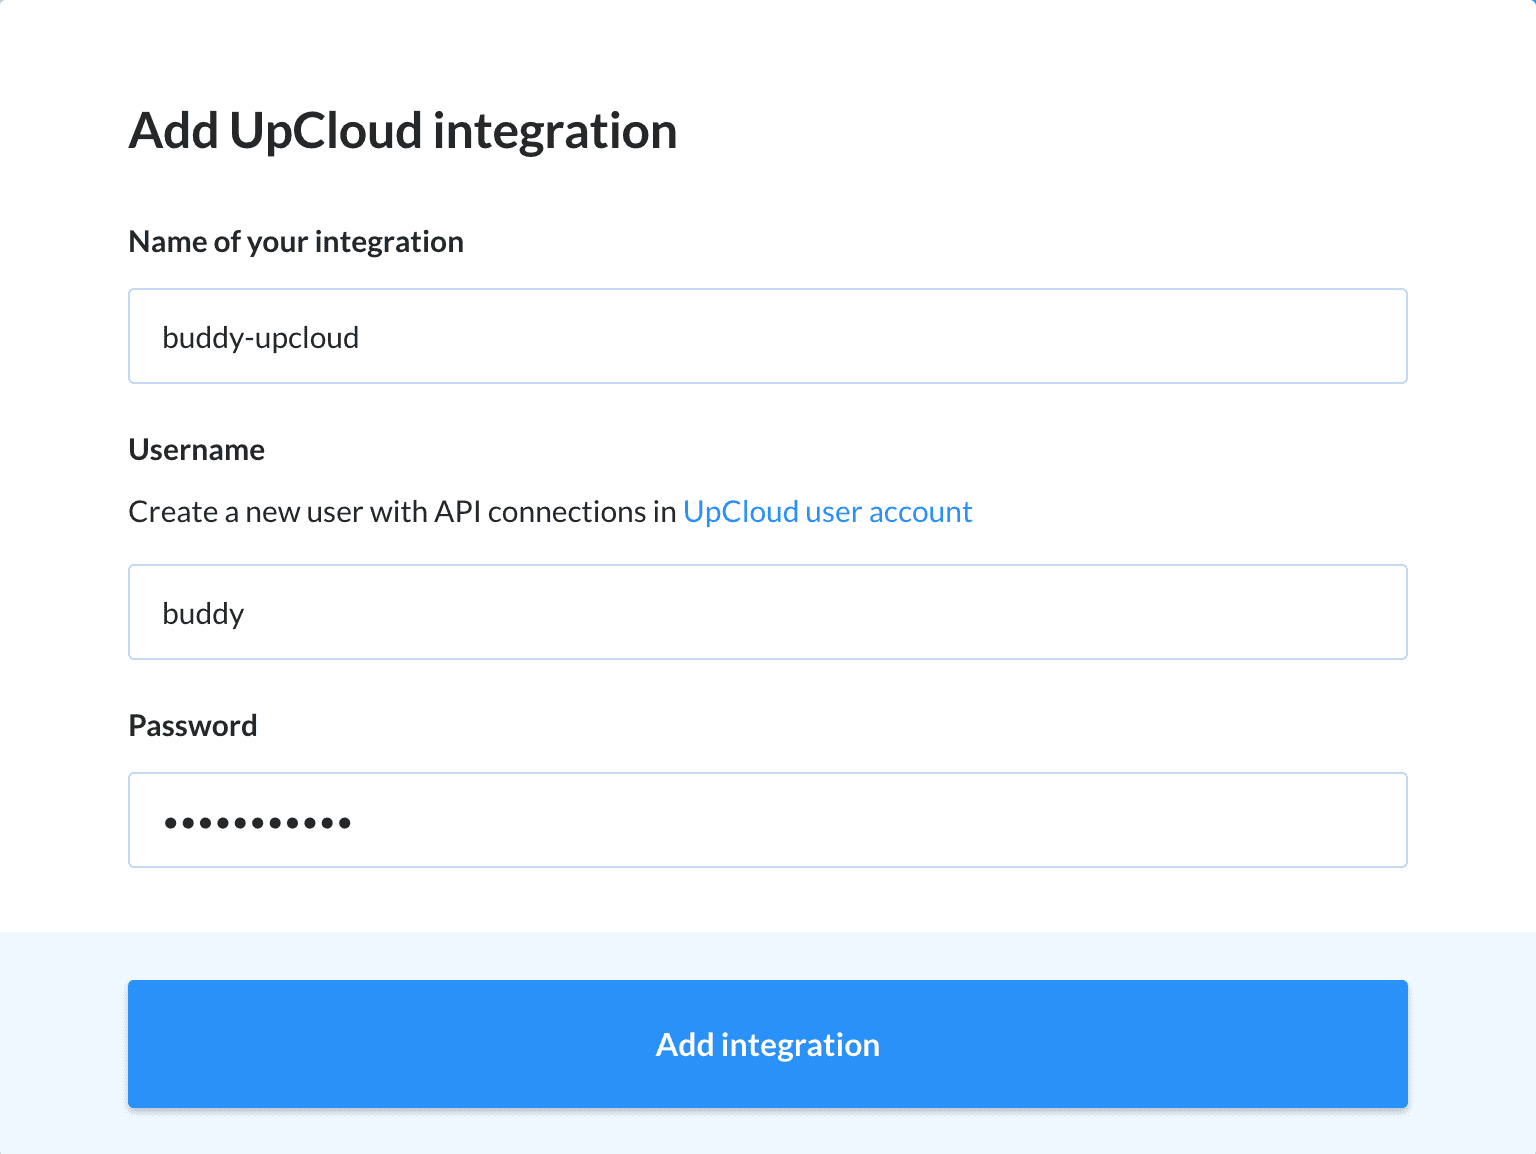 Adding UpCloud integration in Buddy